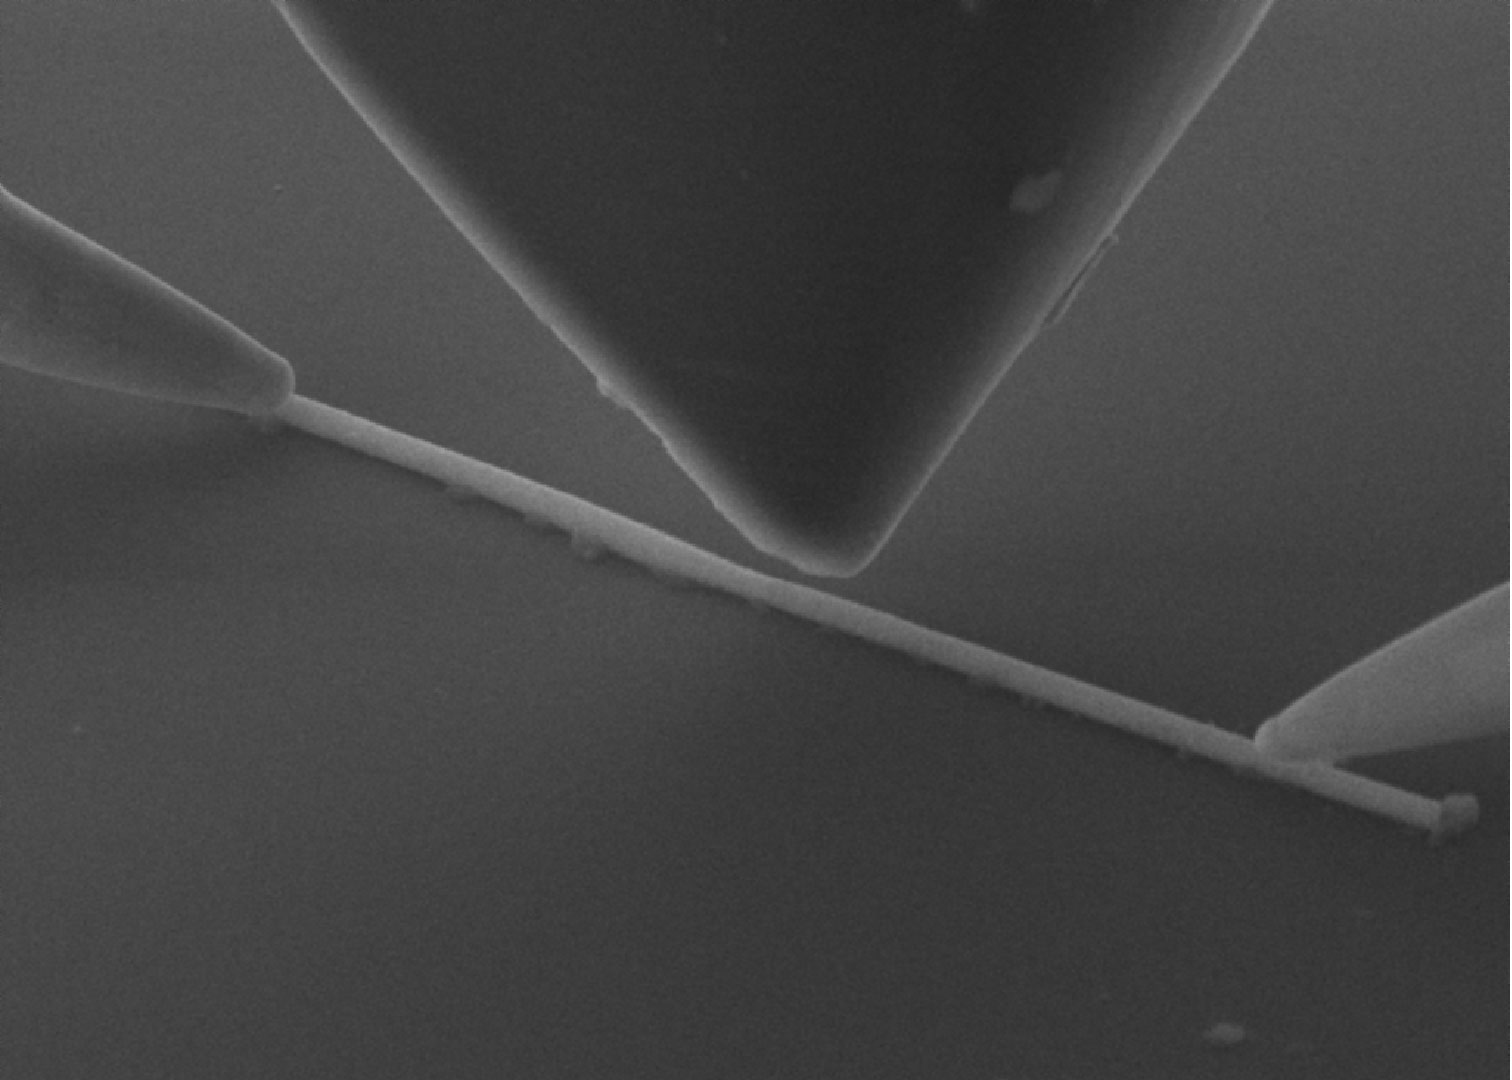 Nano probers and a nanoindentor in contact with a metal line inside an SEM to measure transport change upon indentation.